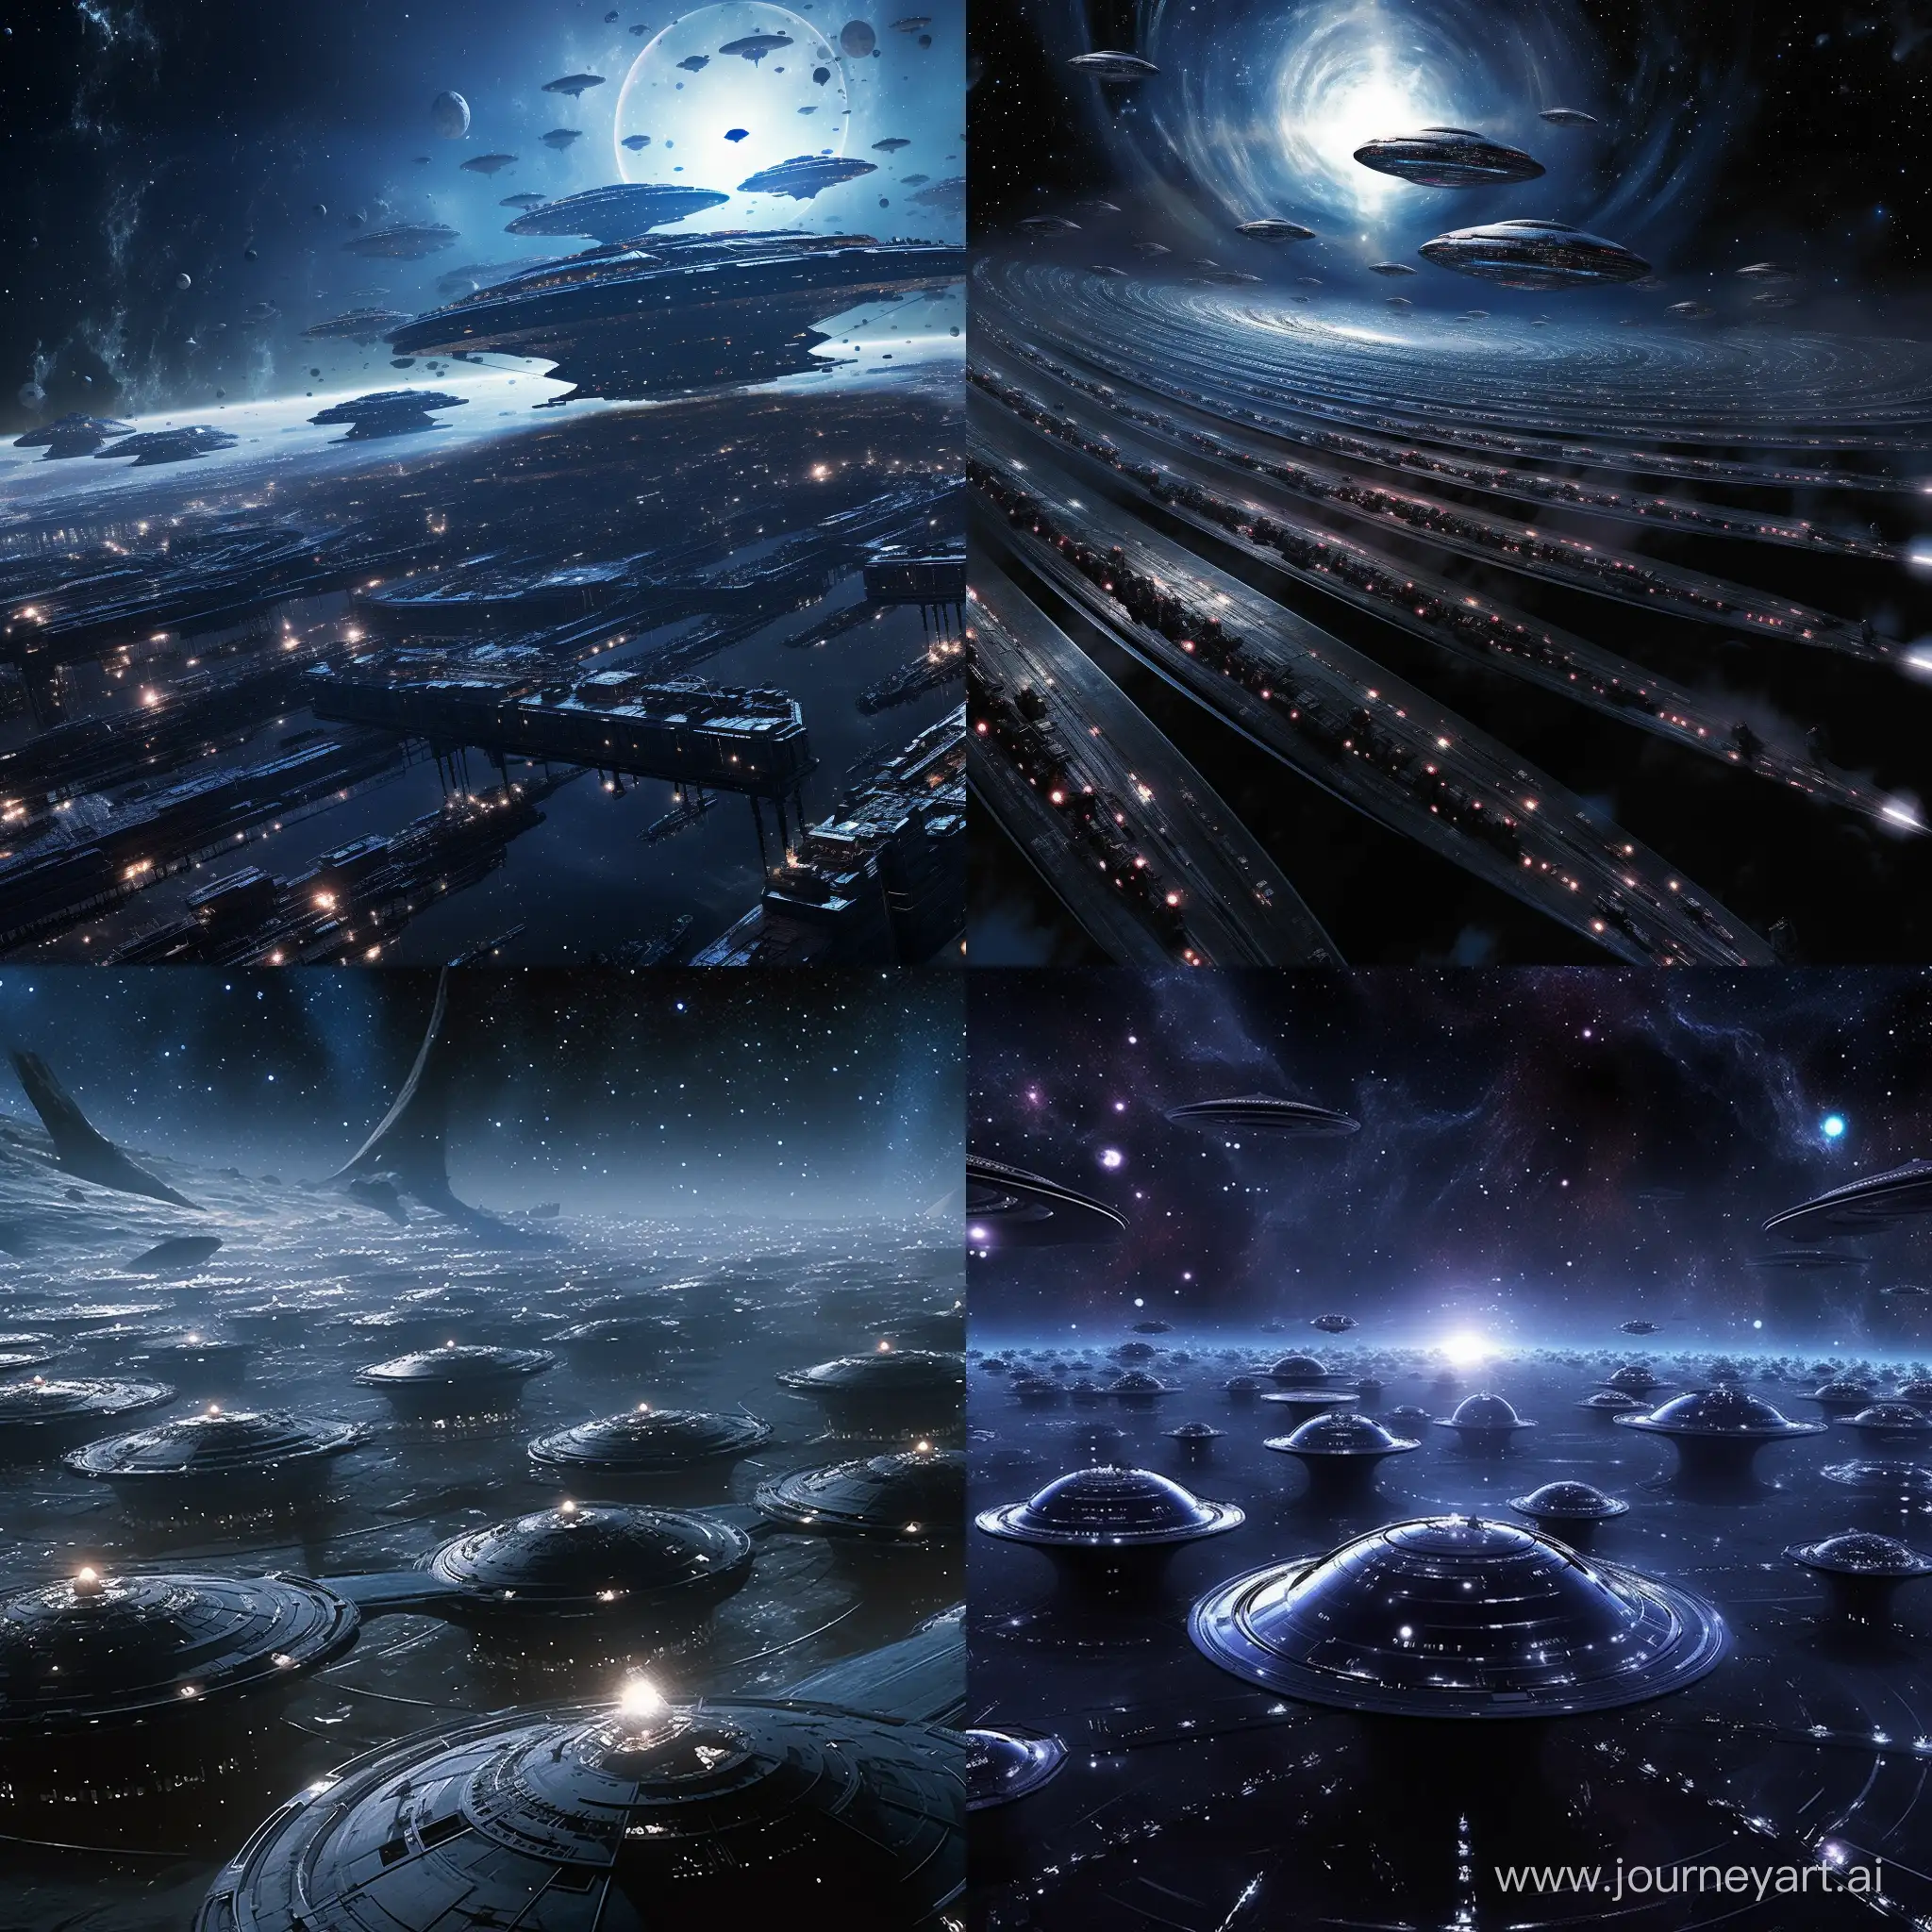 Spectacular-Interstellar-Odyssey-Silver-Starships-Enroute-to-Distant-Planet